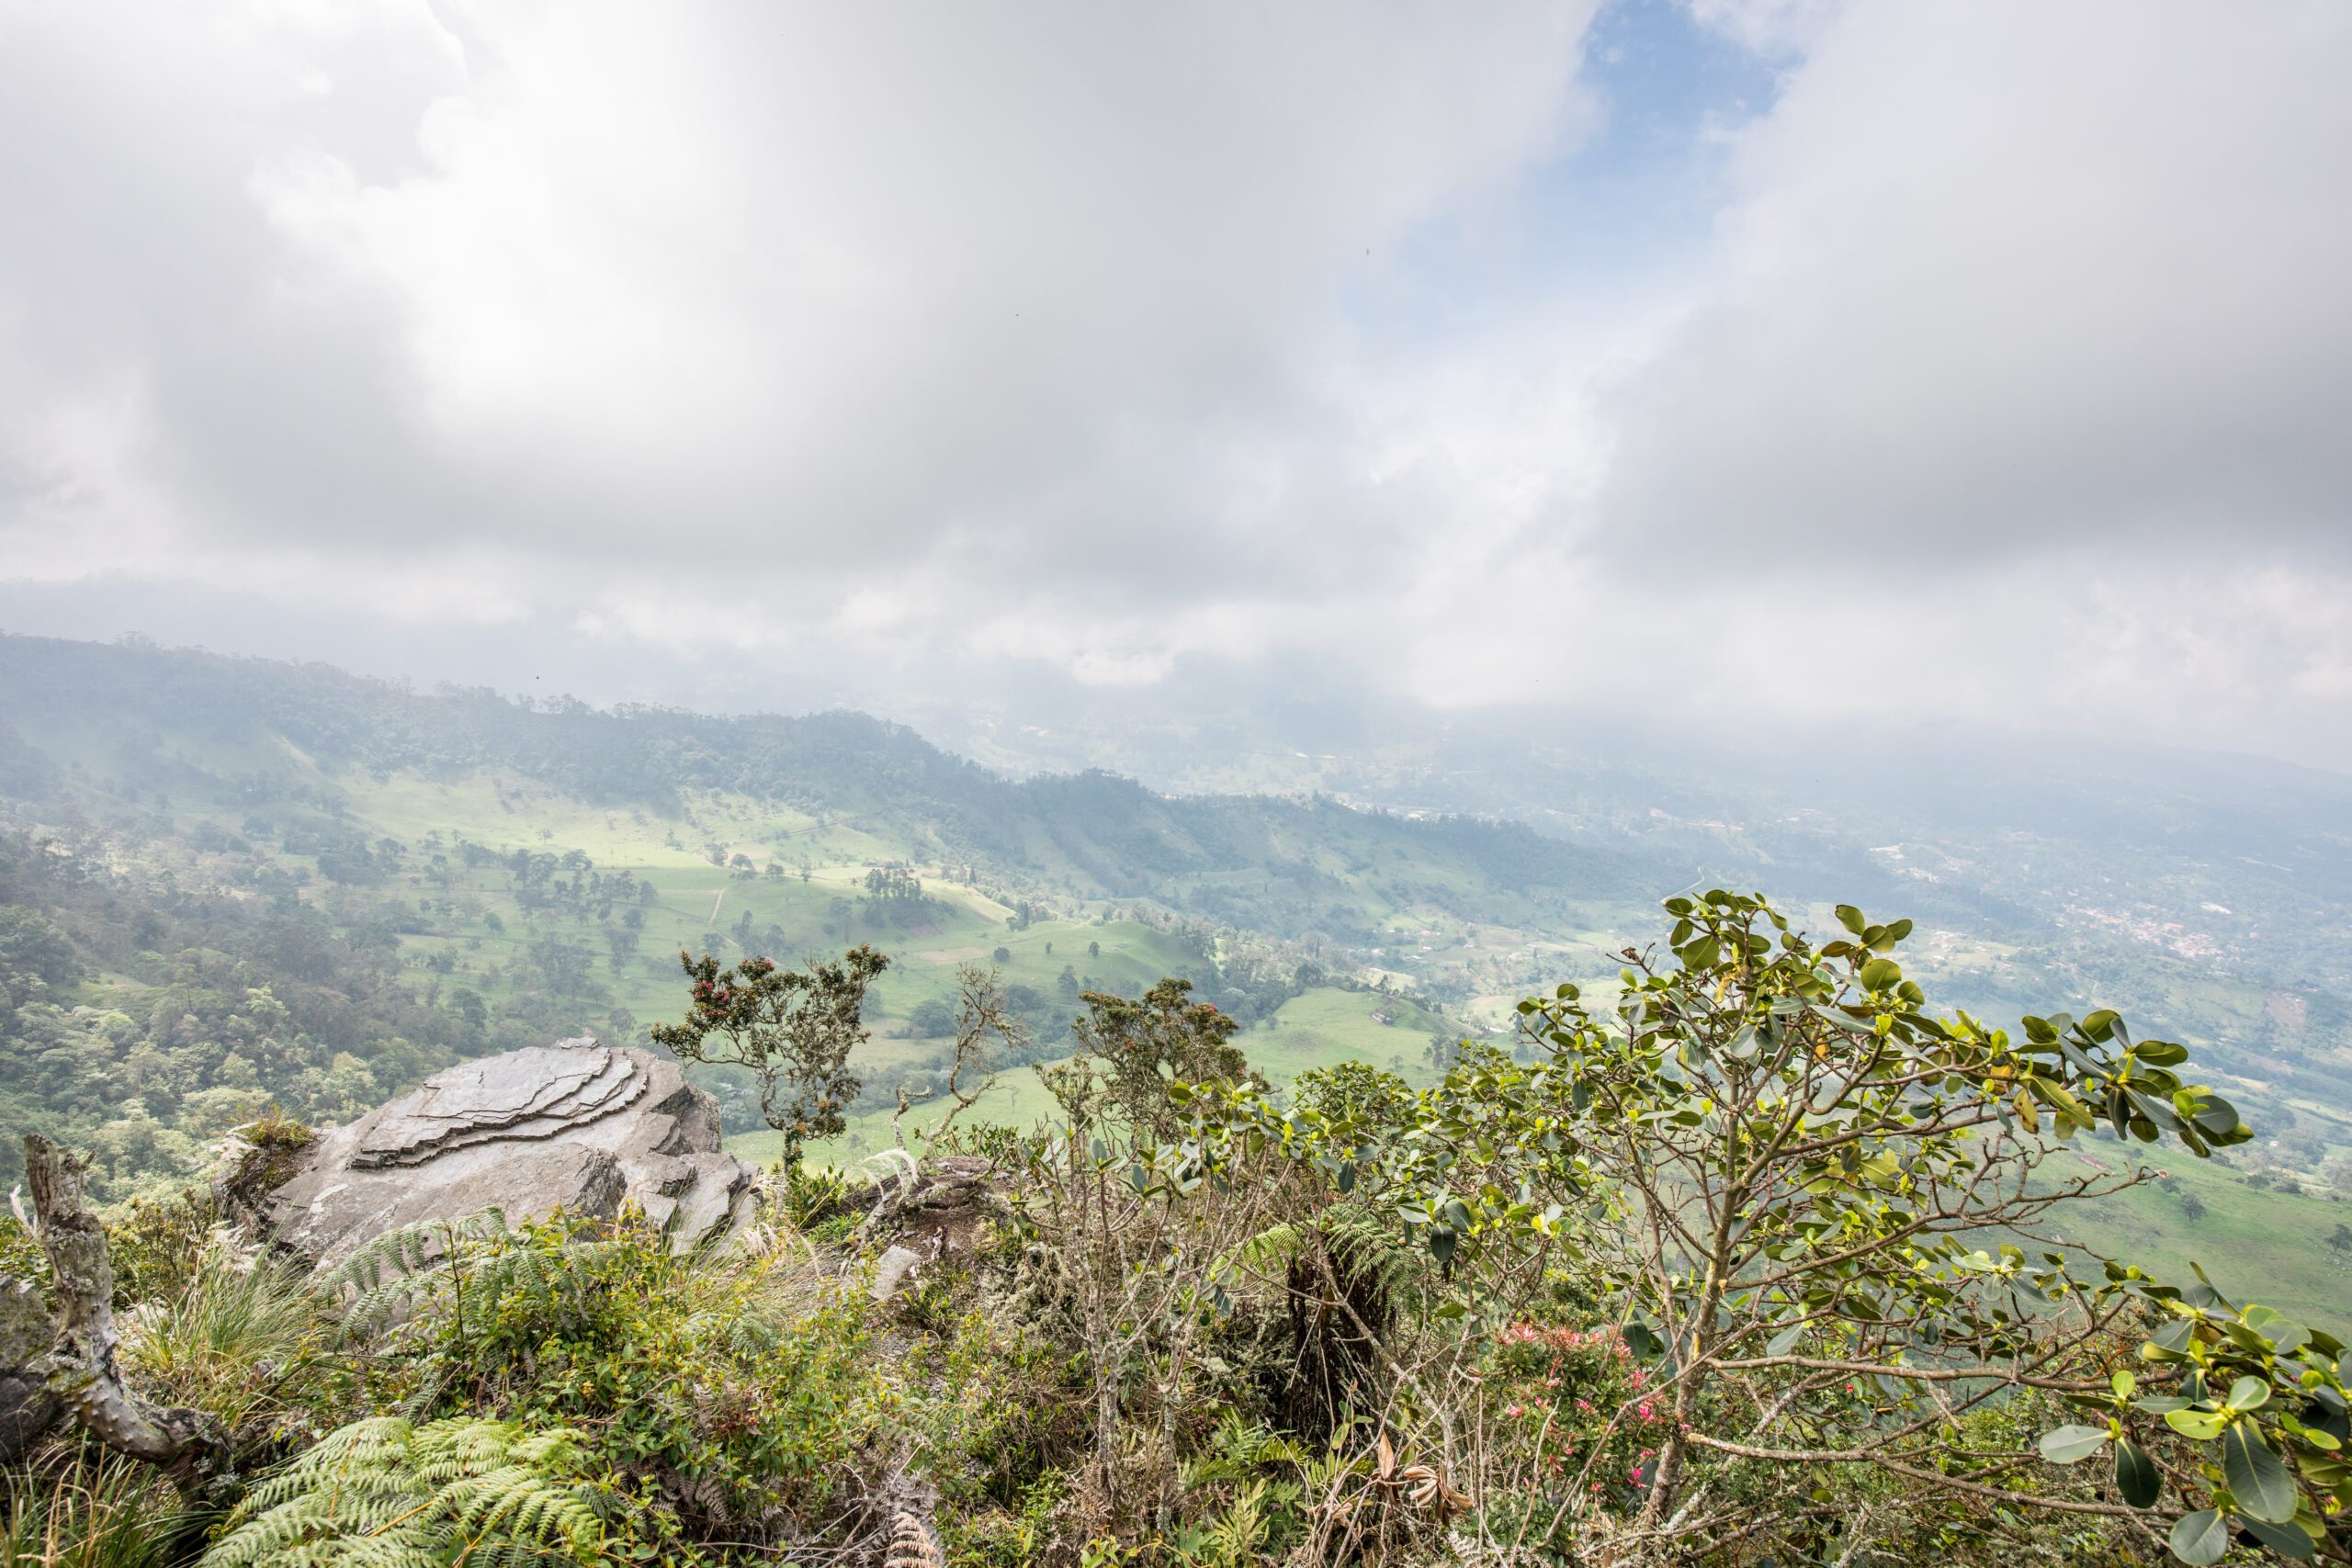 Expansive view of a lush, green landscape with hills, trees, and a partially cloudy sky, seen from a high vantage point among rocks and vegetation. One of the must-see sights during Bogotá city tours, offering a perfect escape amidst nature's beauty.